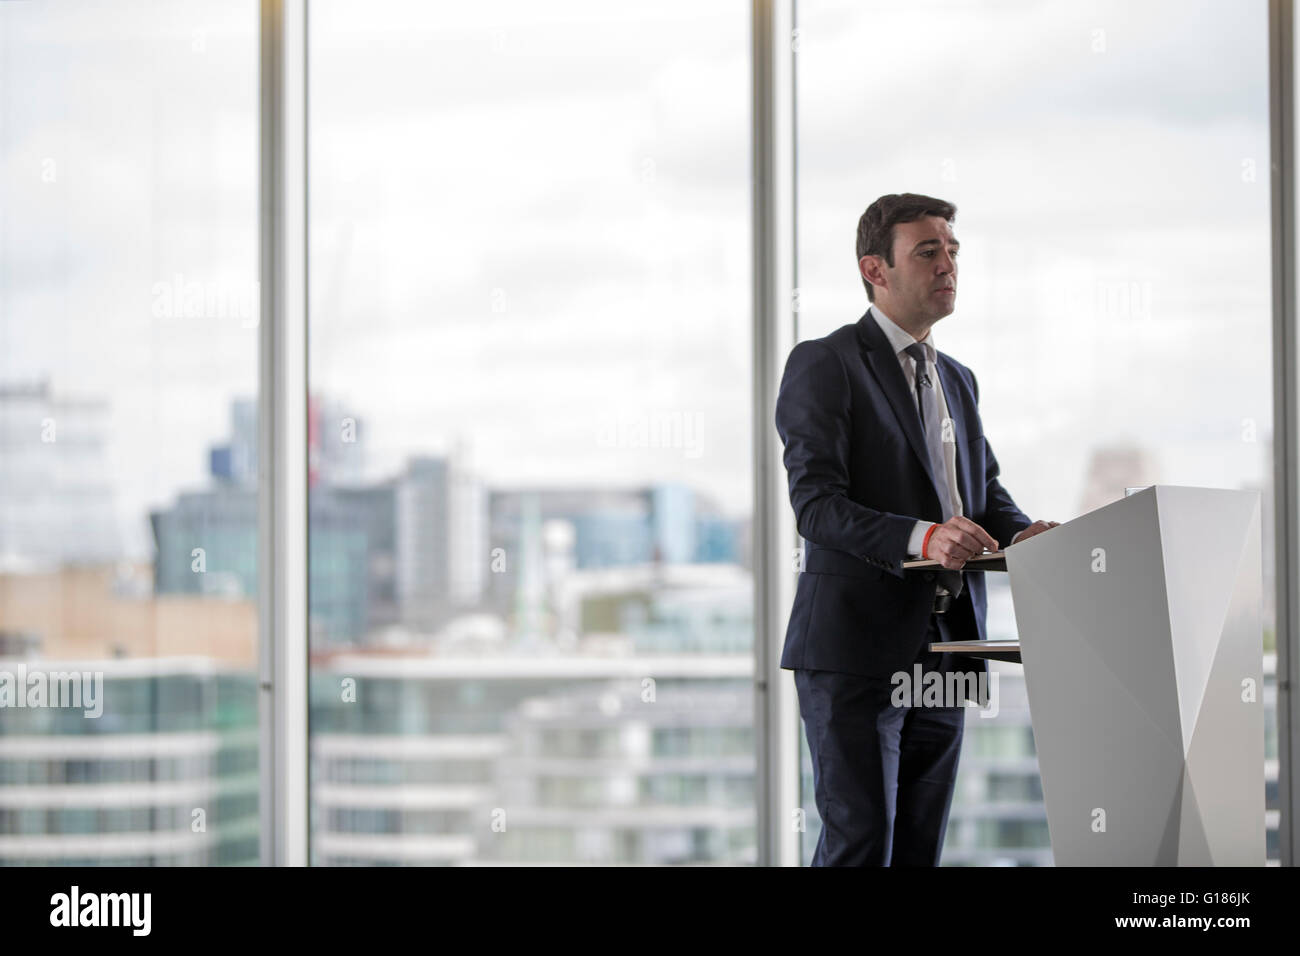 UK Labour politician Andy Burnham MP addresses business leaders in offices at More London, London UK. Stock Photo